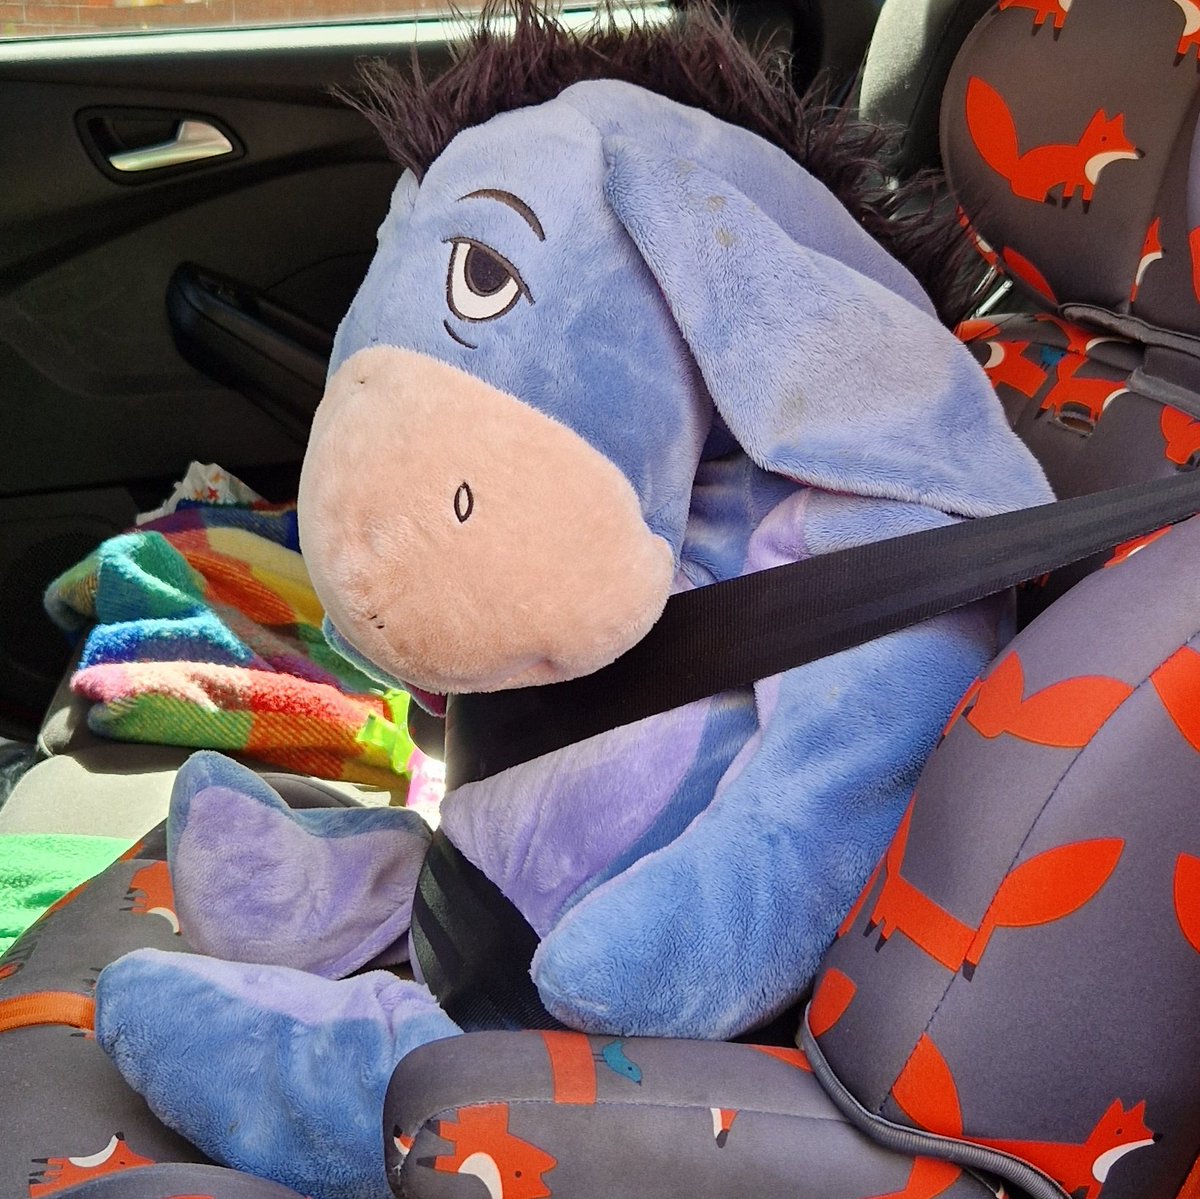 6yo insisted that Eeyore came in the car today. He made me smile every time I caught sight of him in the rear view mirror.